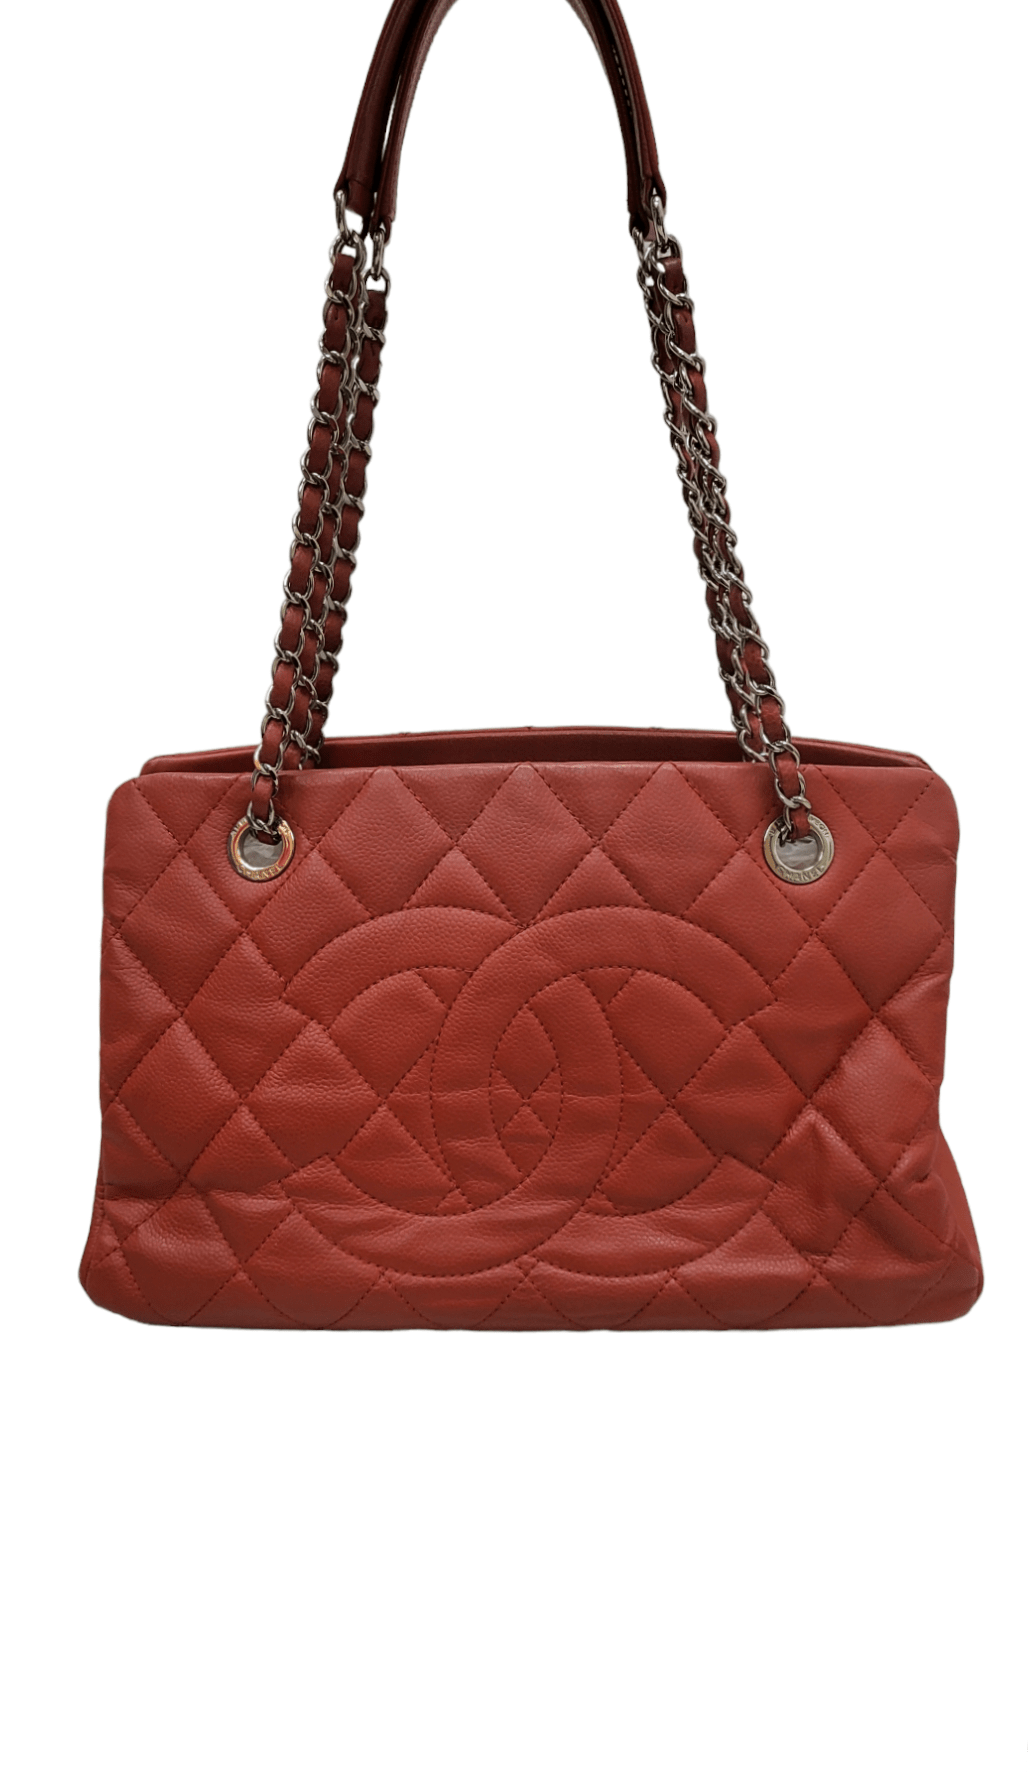 Chanel Chanel Shopping Tote Red Caviar SHW SKC1339